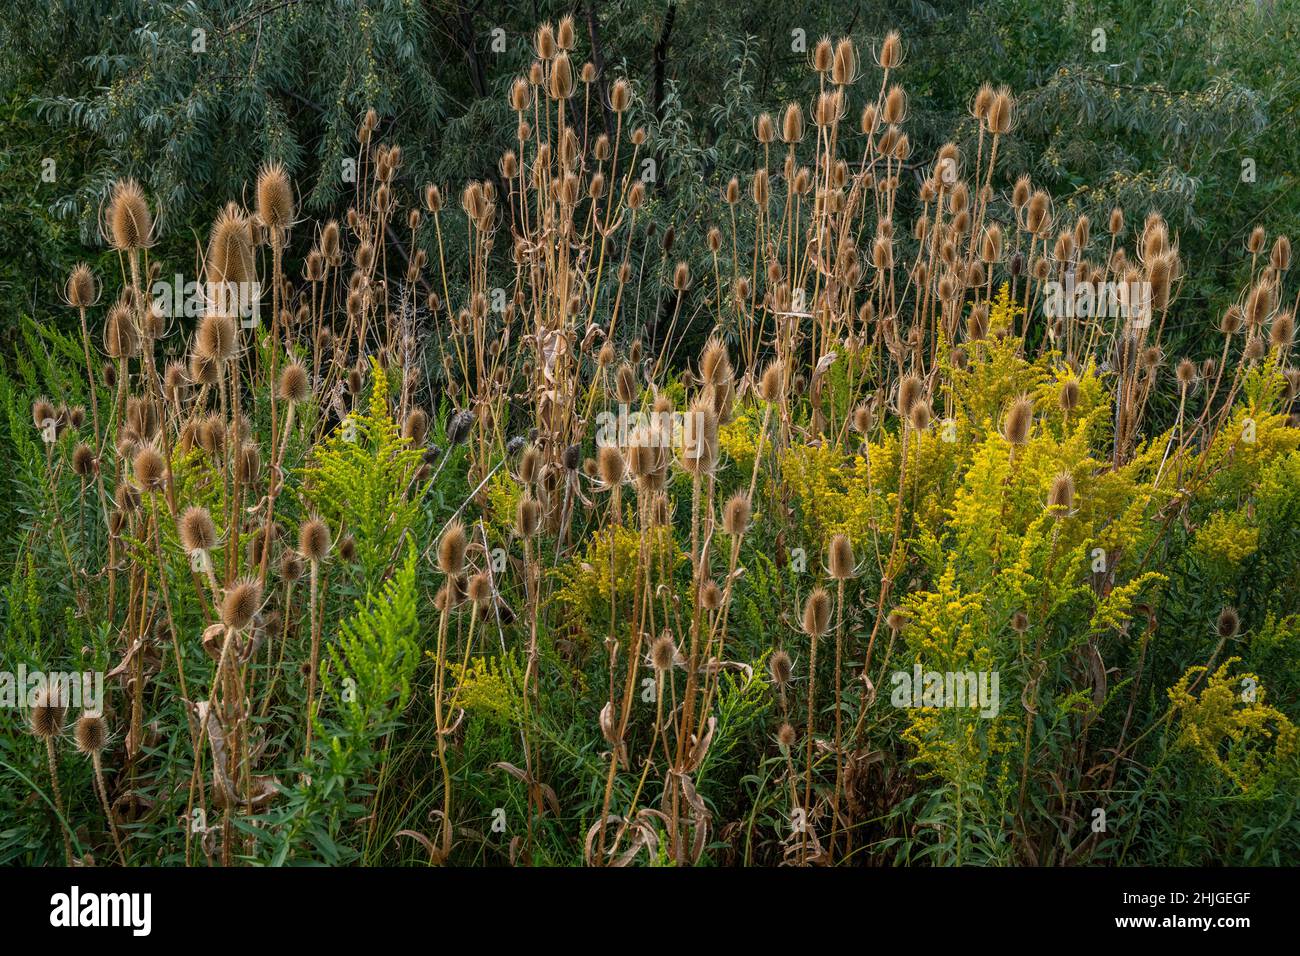 Common teasel (Dipsacus fullonum) with goldenrod (Solidago canadensis) and Russian olive (Elaeagnus angustifolia) in Boise's Marianne Williams Park Stock Photo